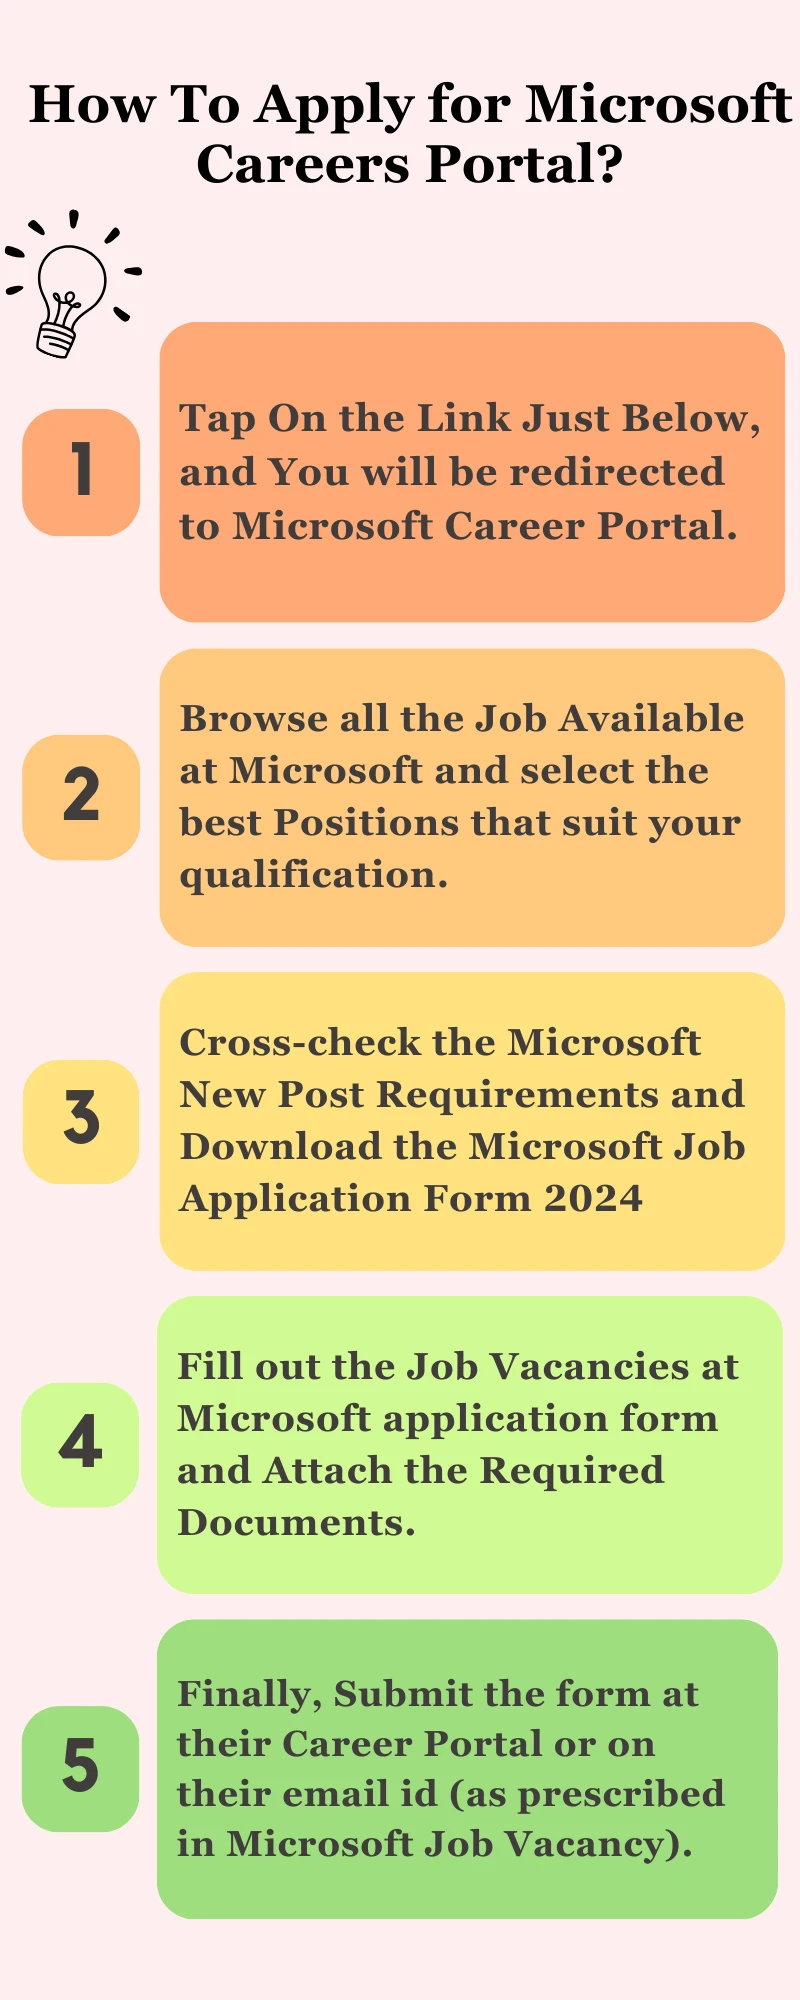 How To Apply for Microsoft Careers Portal?